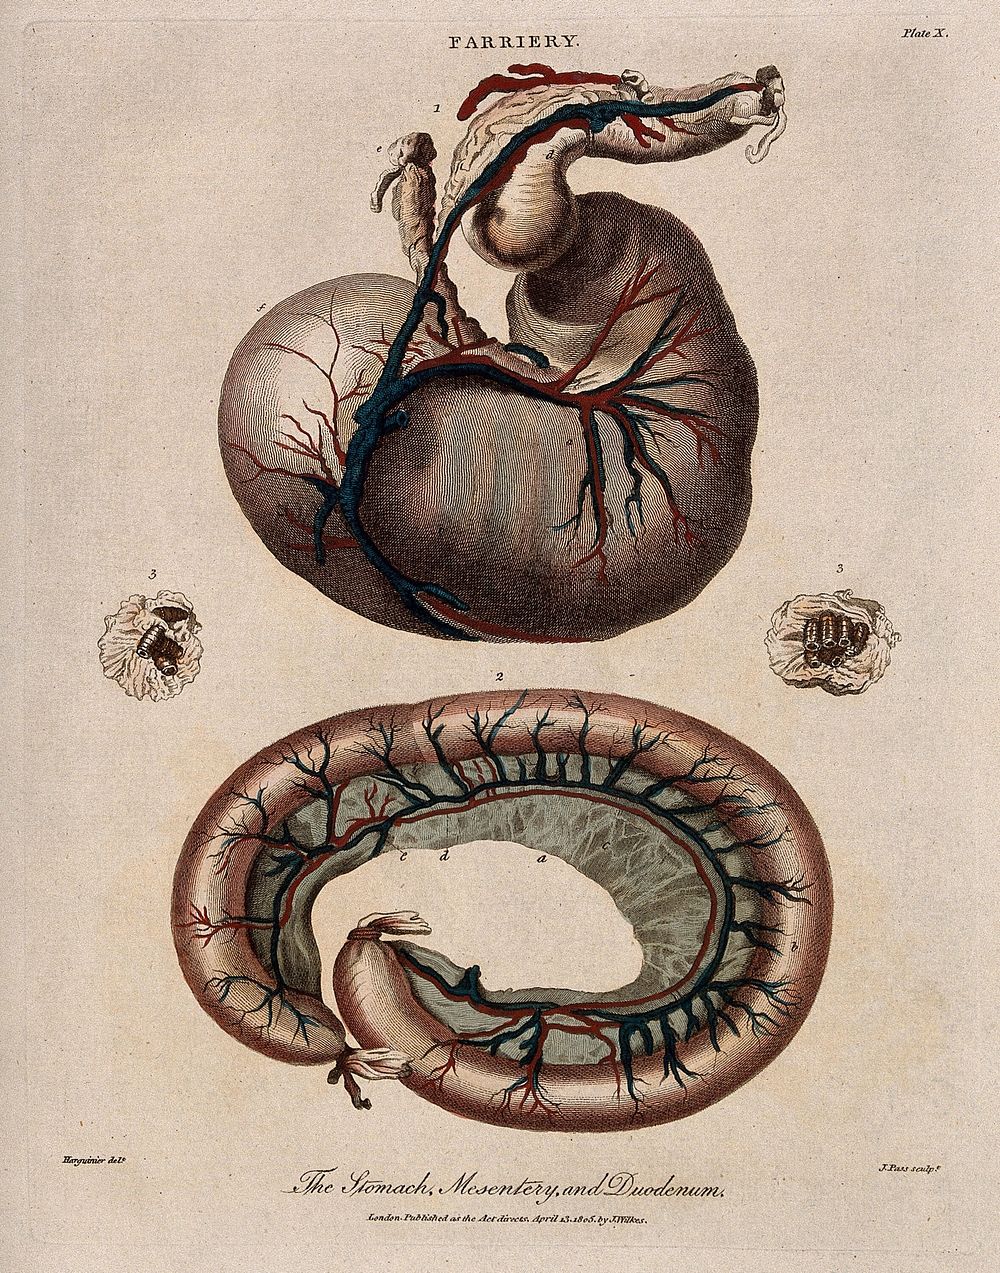 Dissection of a horse's stomach, mesentery and duodenum: three figures. Coloured engraving by J. Pass after Harguinier, 1805.